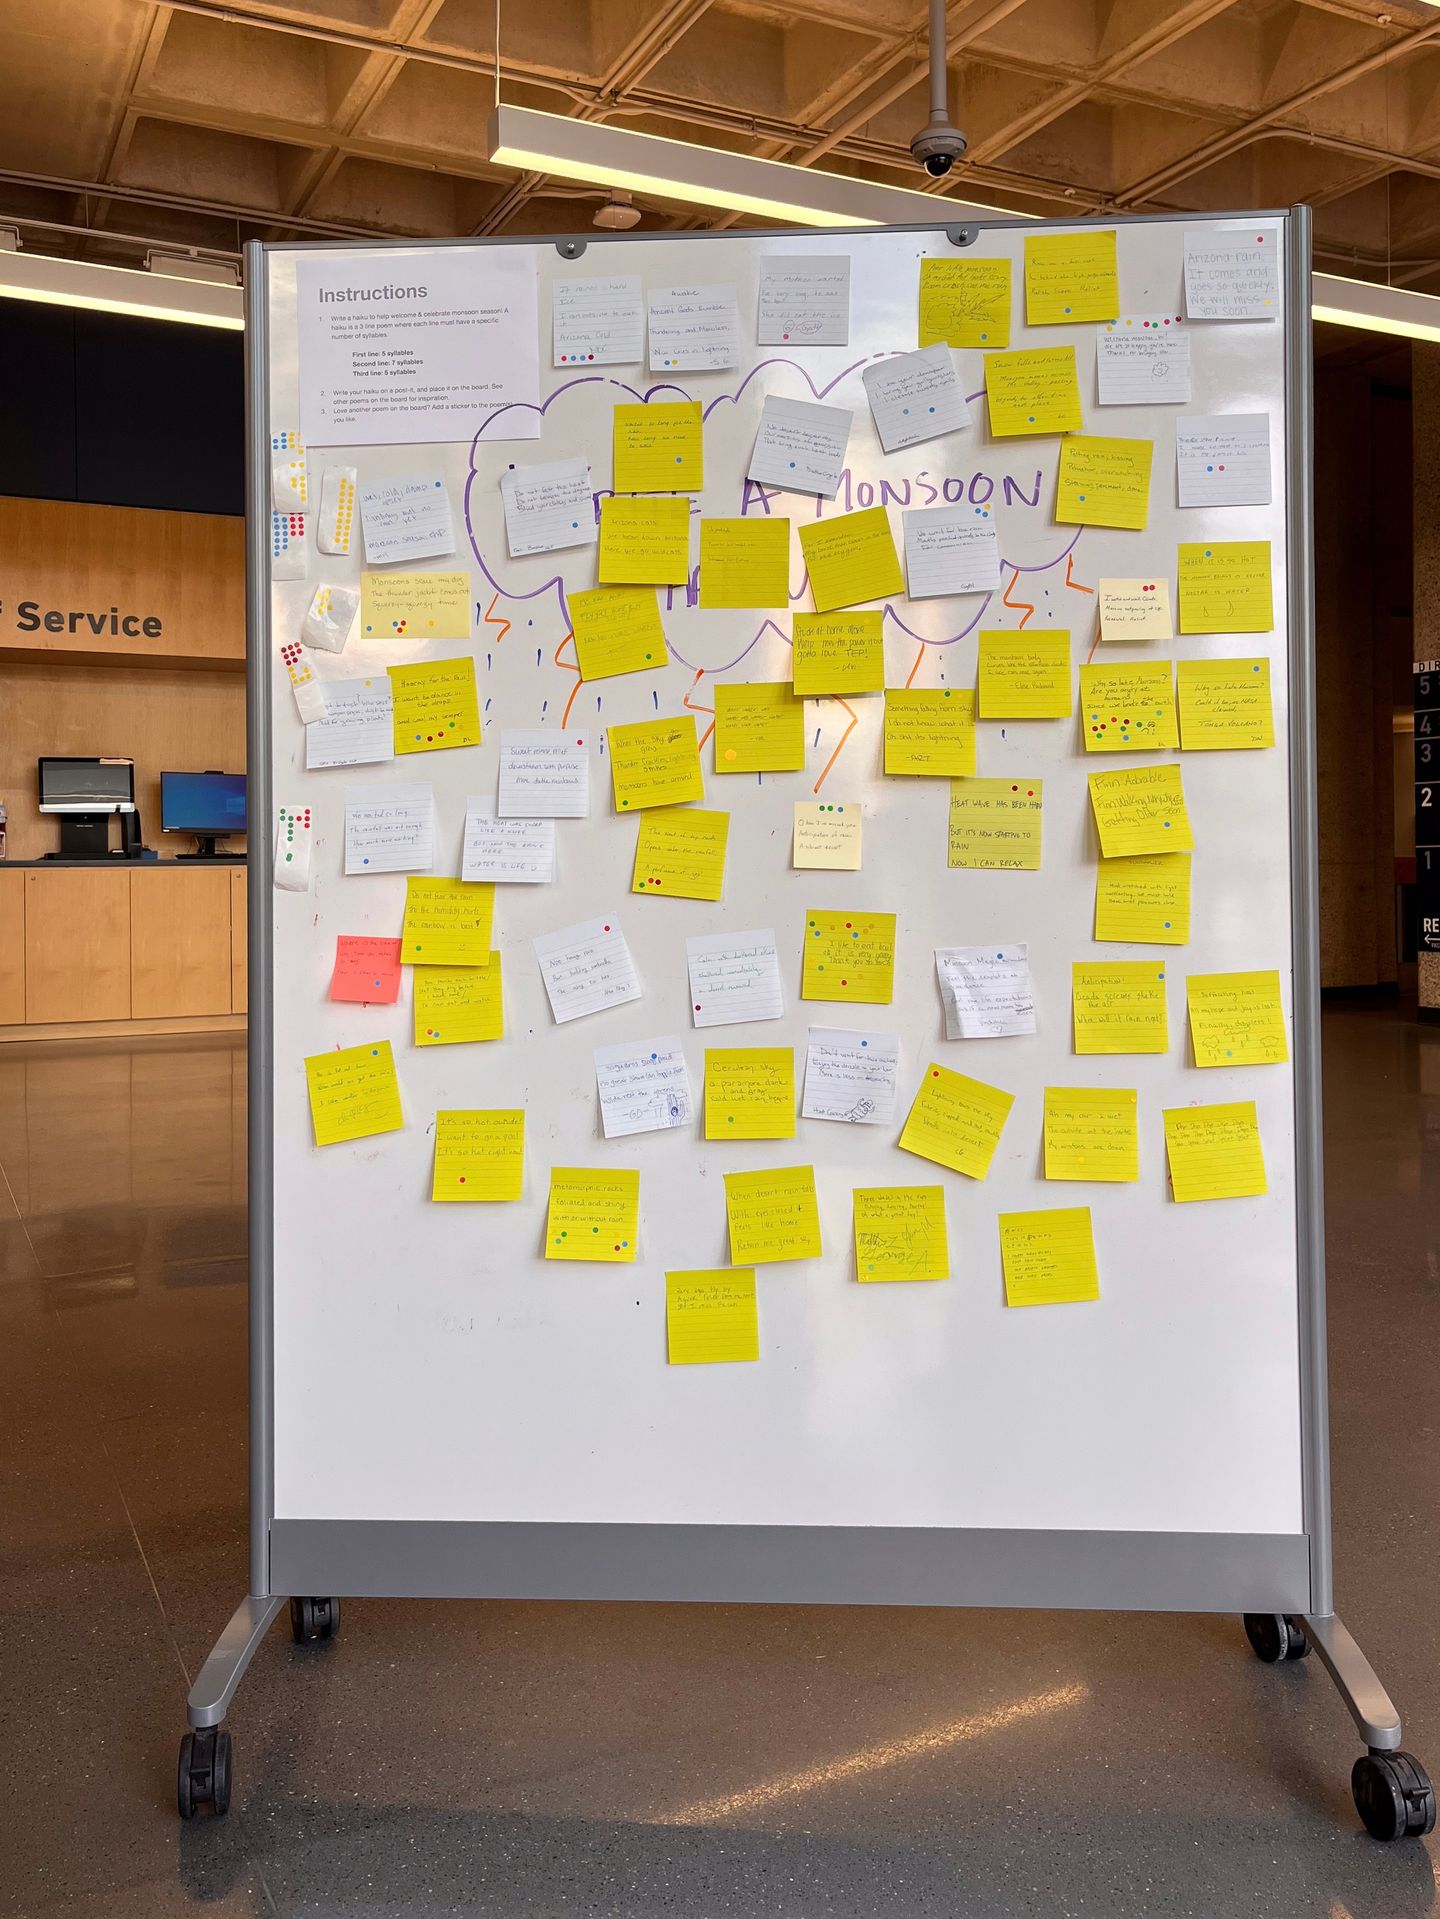 A whiteboard in an open space covered by white and yellow sticky notes